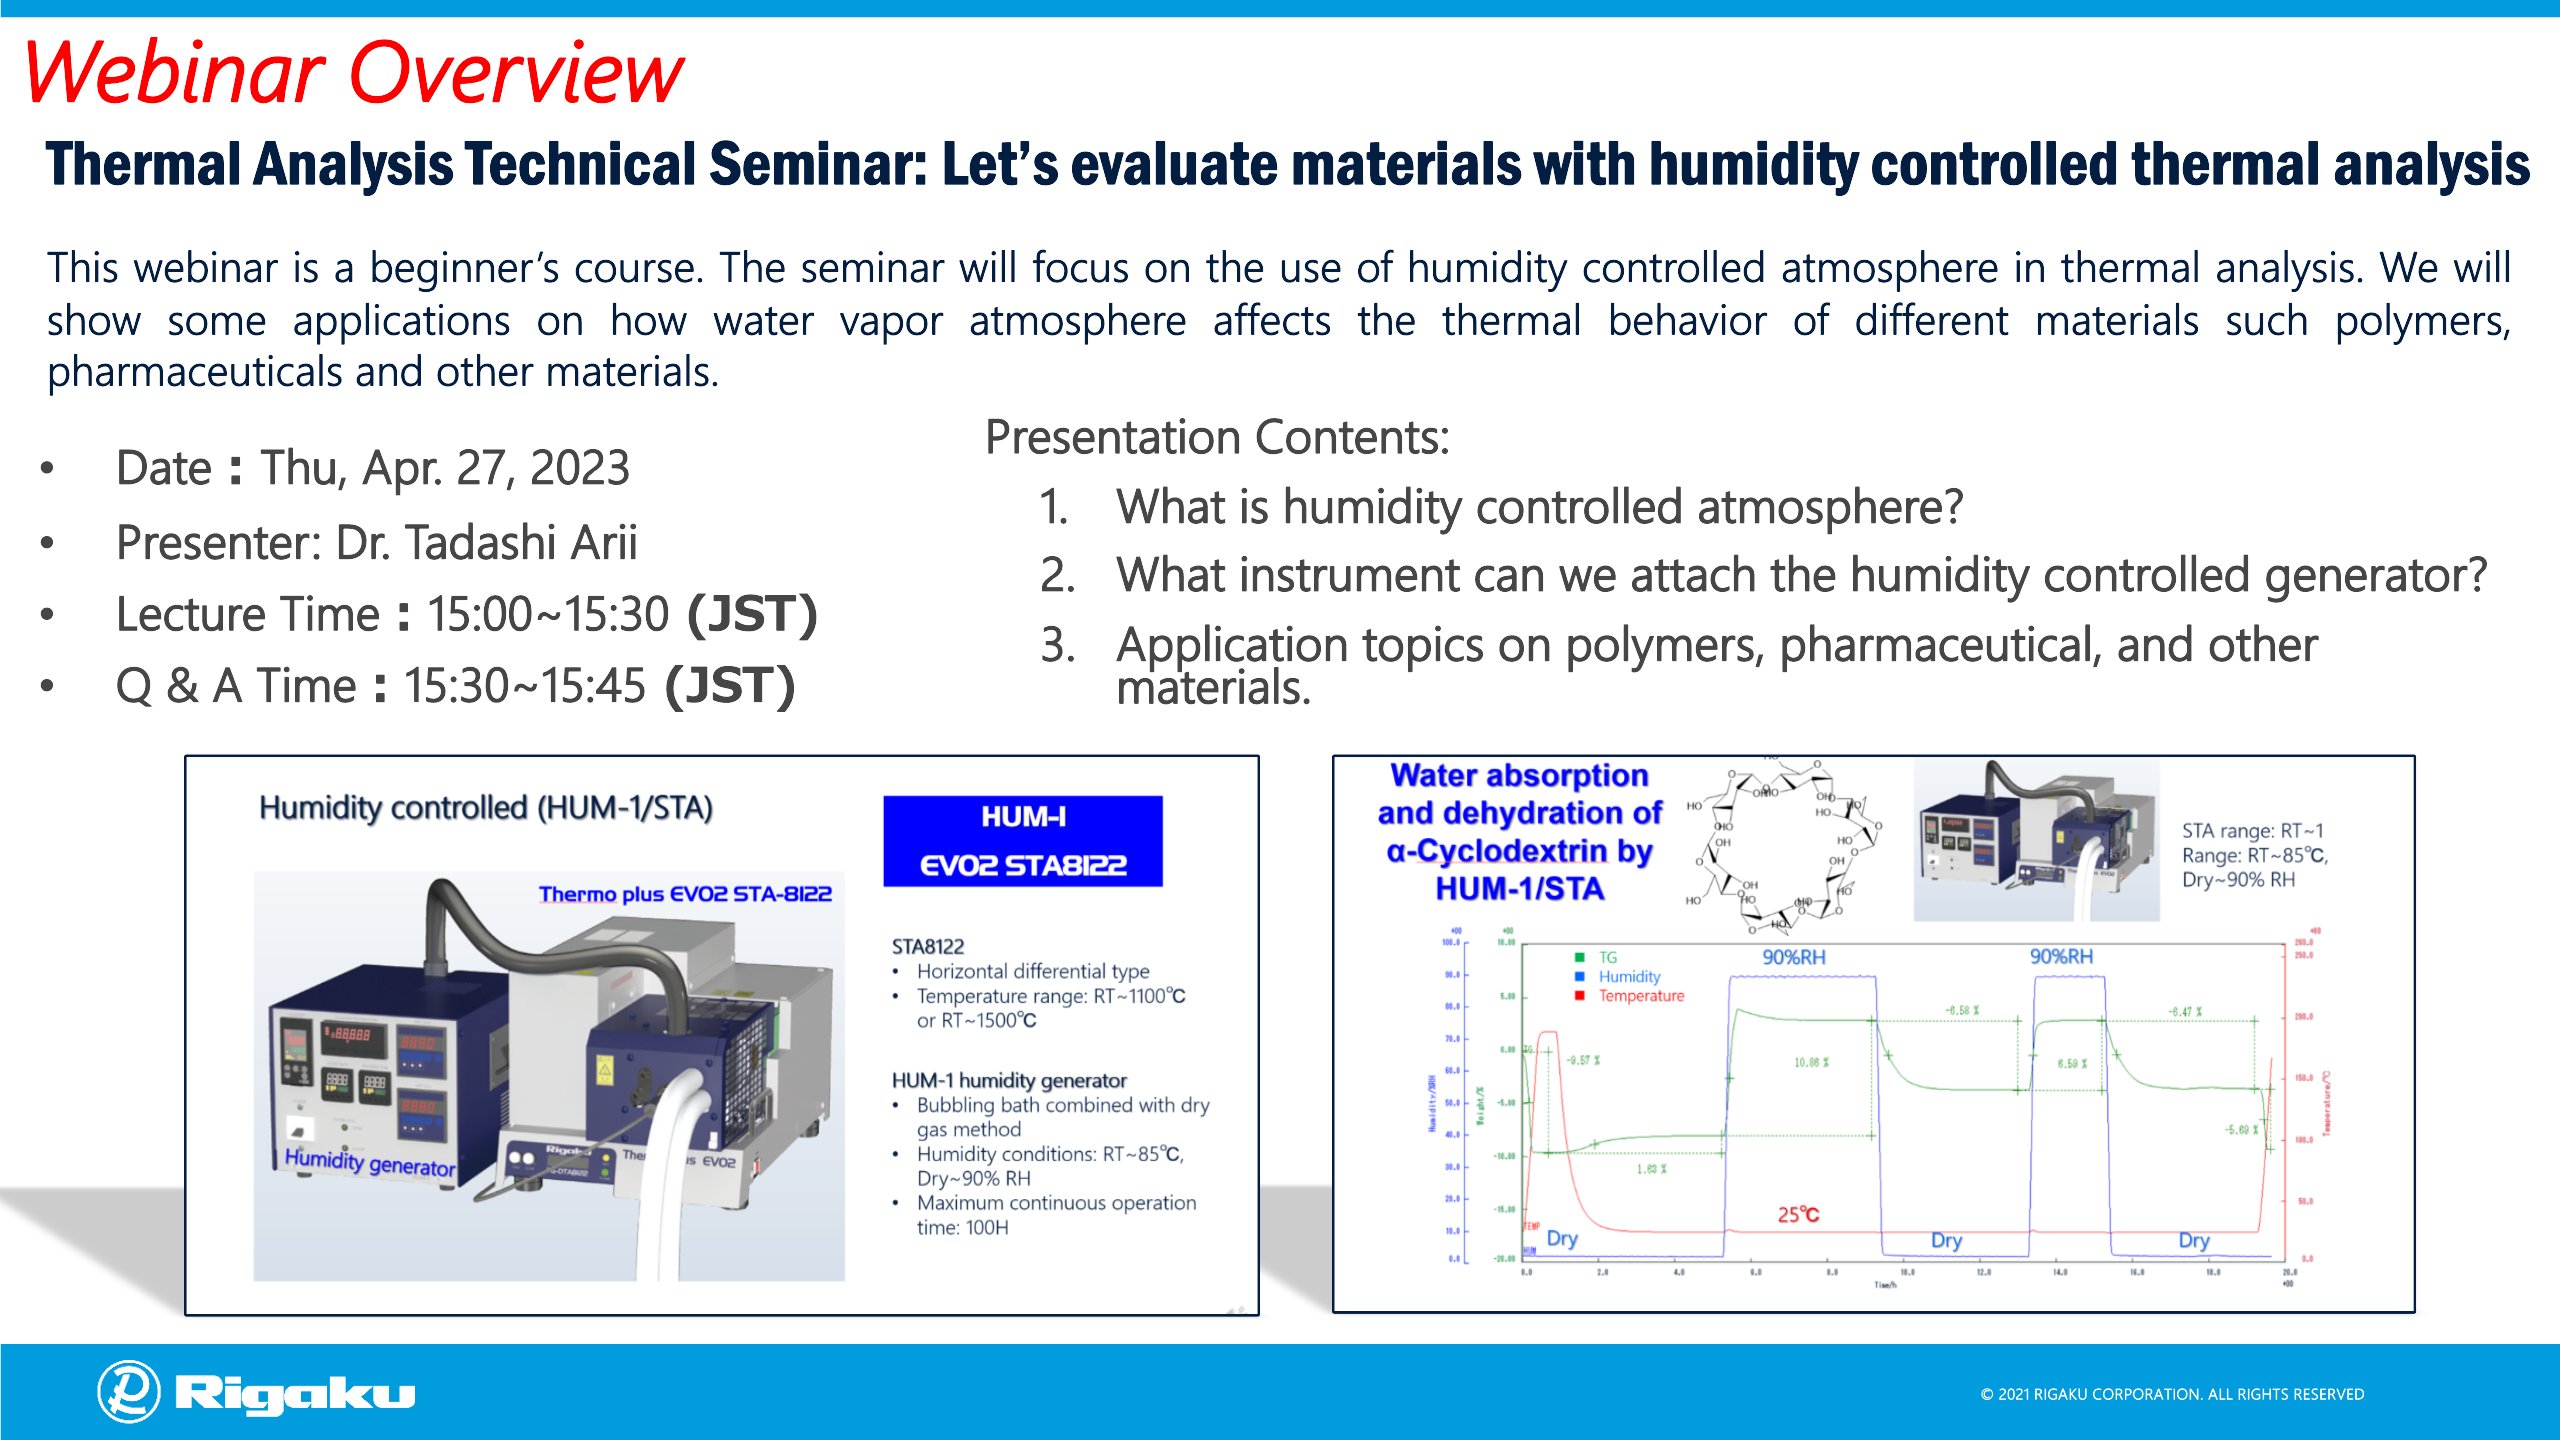 Let’s evaluate materials with humidity controlled thermal analysis